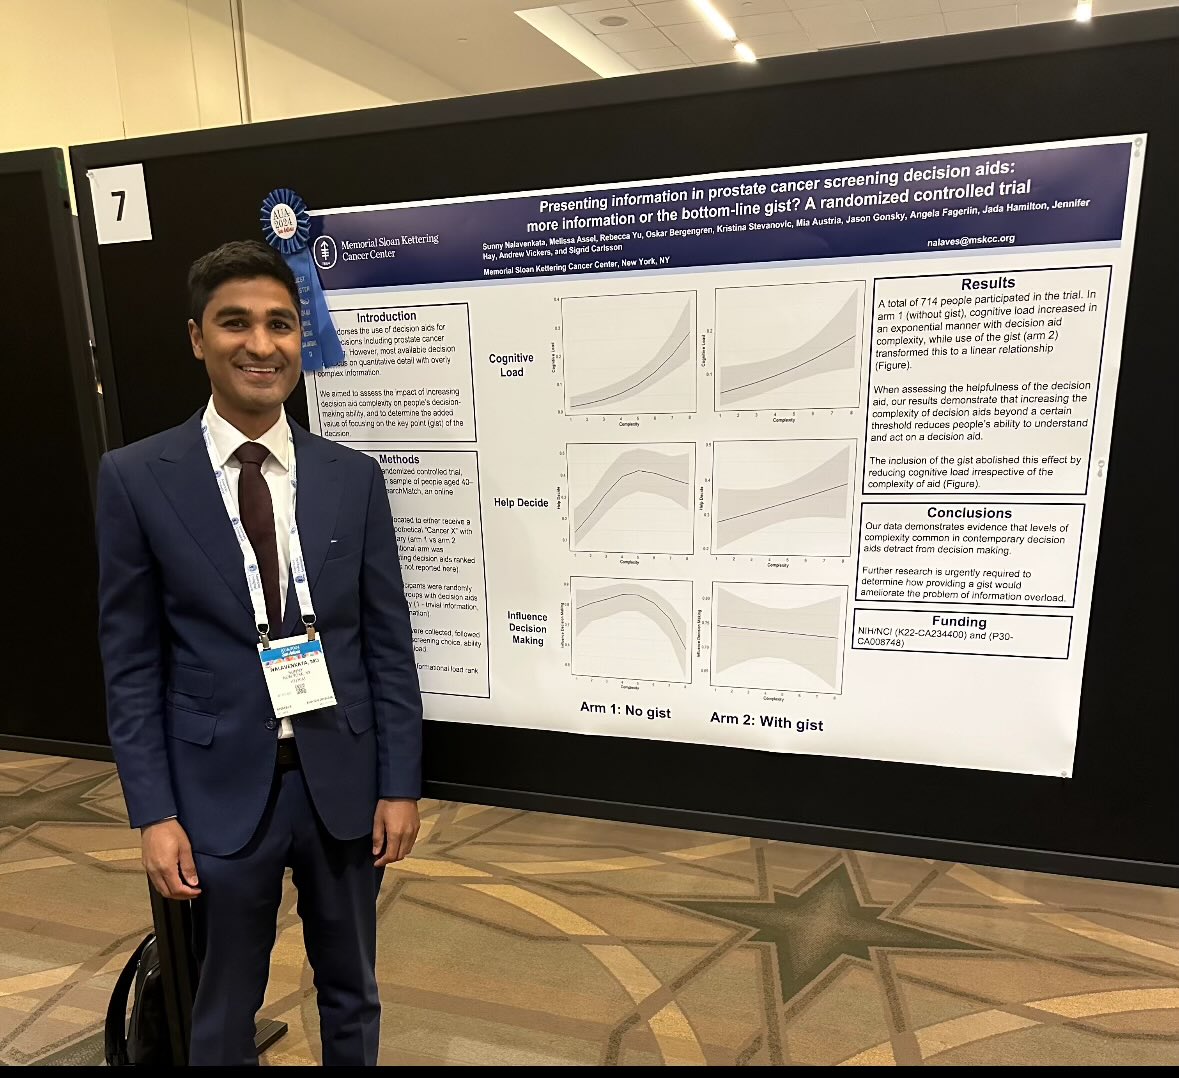 Congrats to our fellow Sunny Nalavenkata and mentor @SigridCarlsson for their best poster on prostate cancer screening decision aids! #aua24